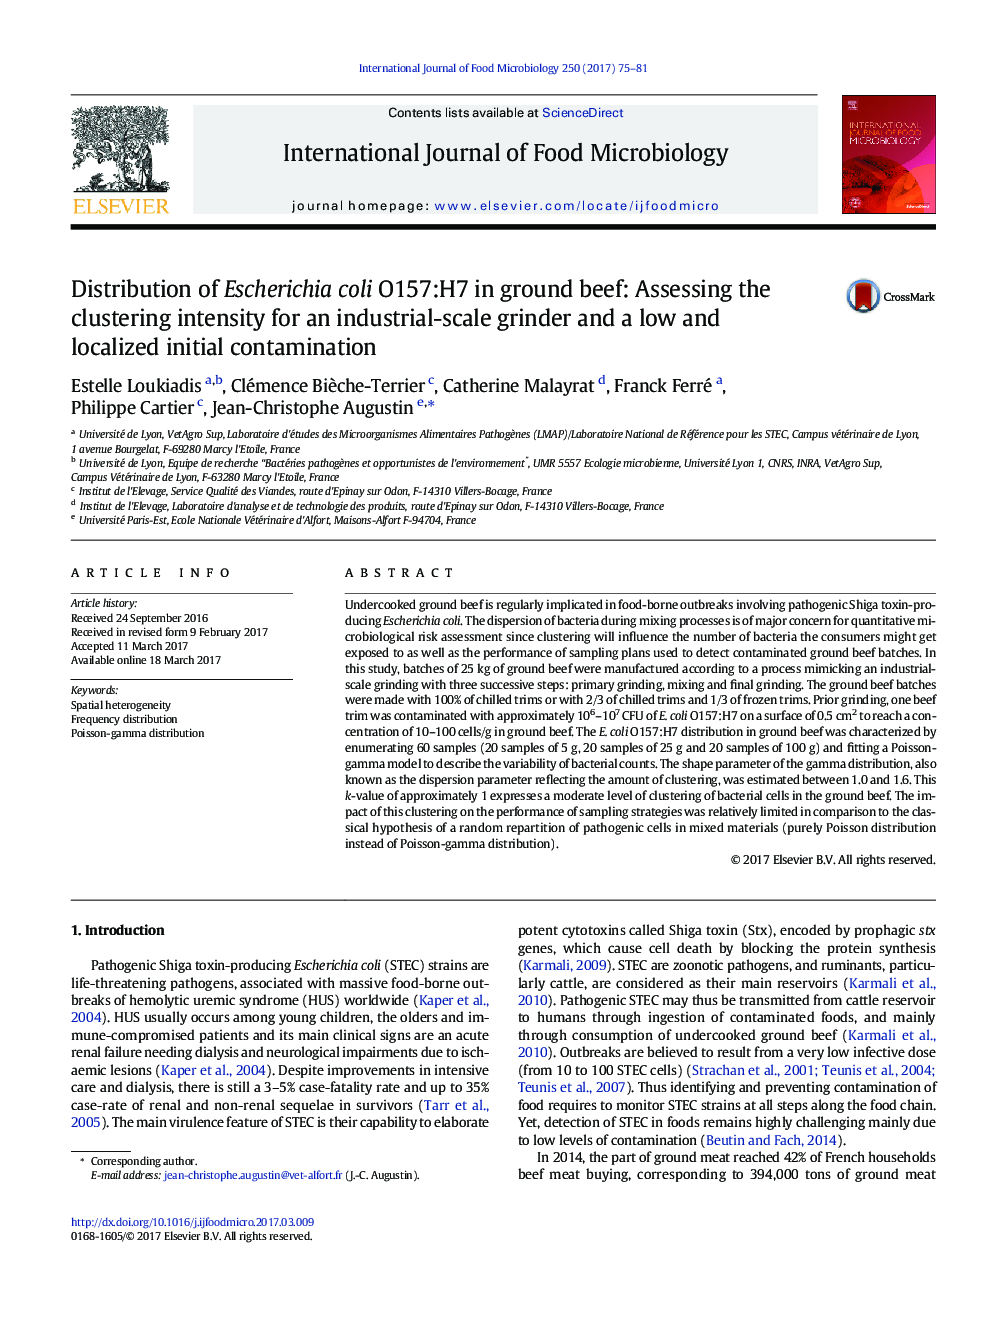 Distribution of Escherichia coli O157:H7 in ground beef: Assessing the clustering intensity for an industrial-scale grinder and a low and localized initial contamination